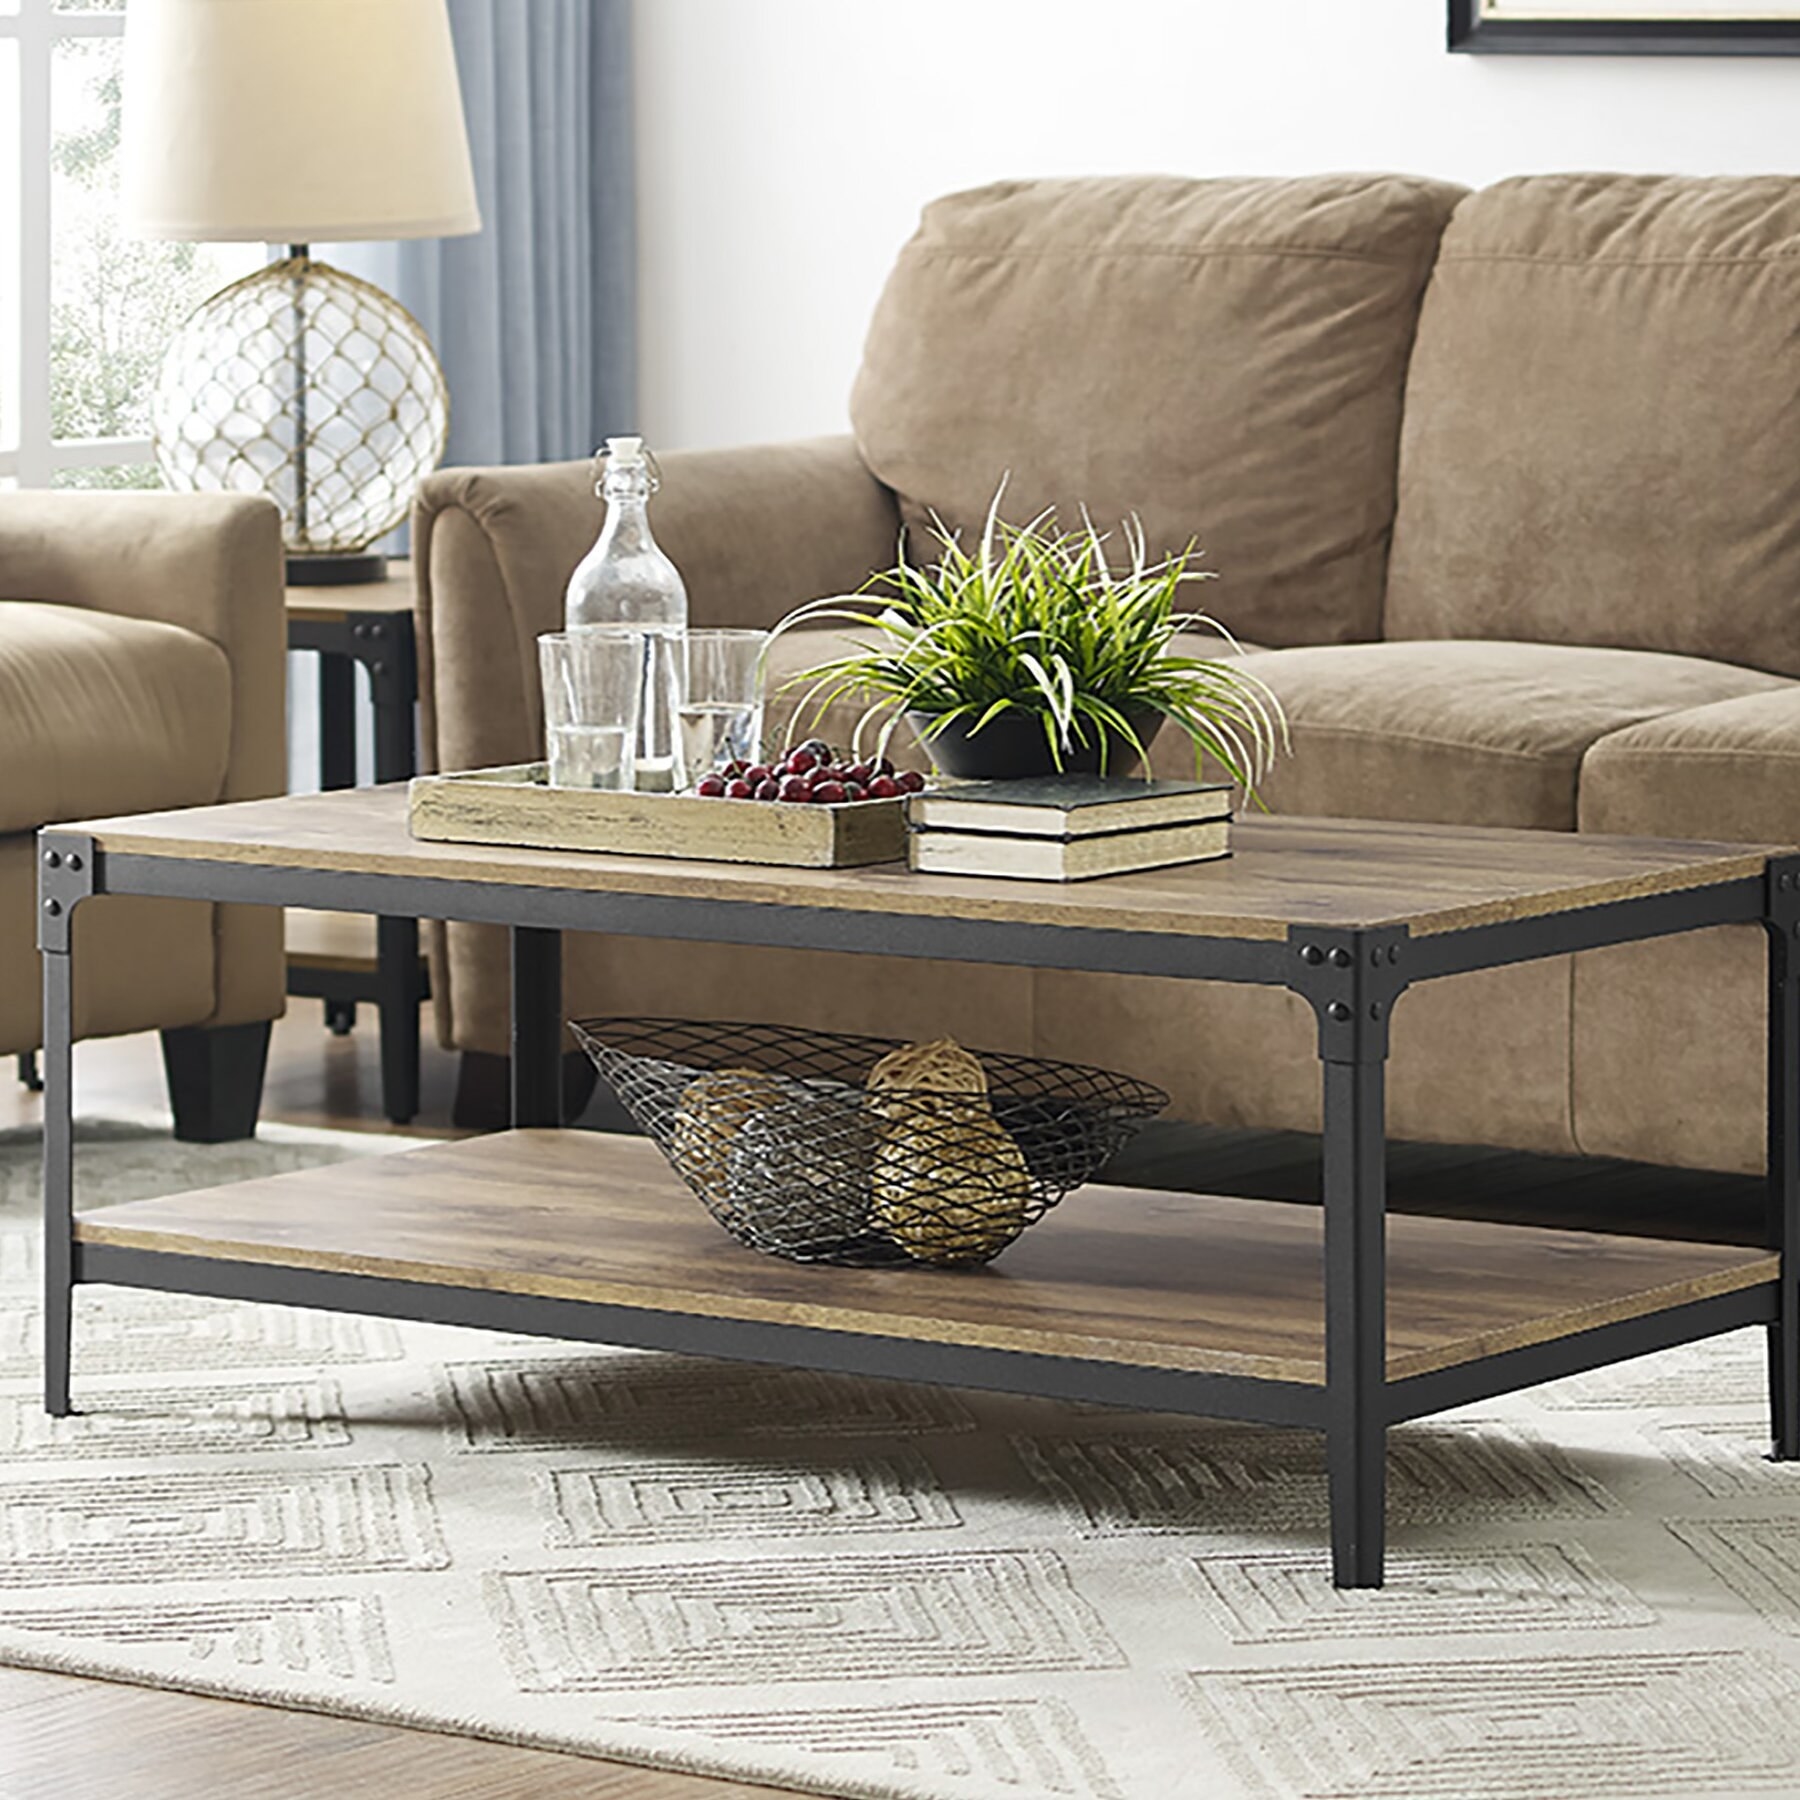 Coffee table in living room